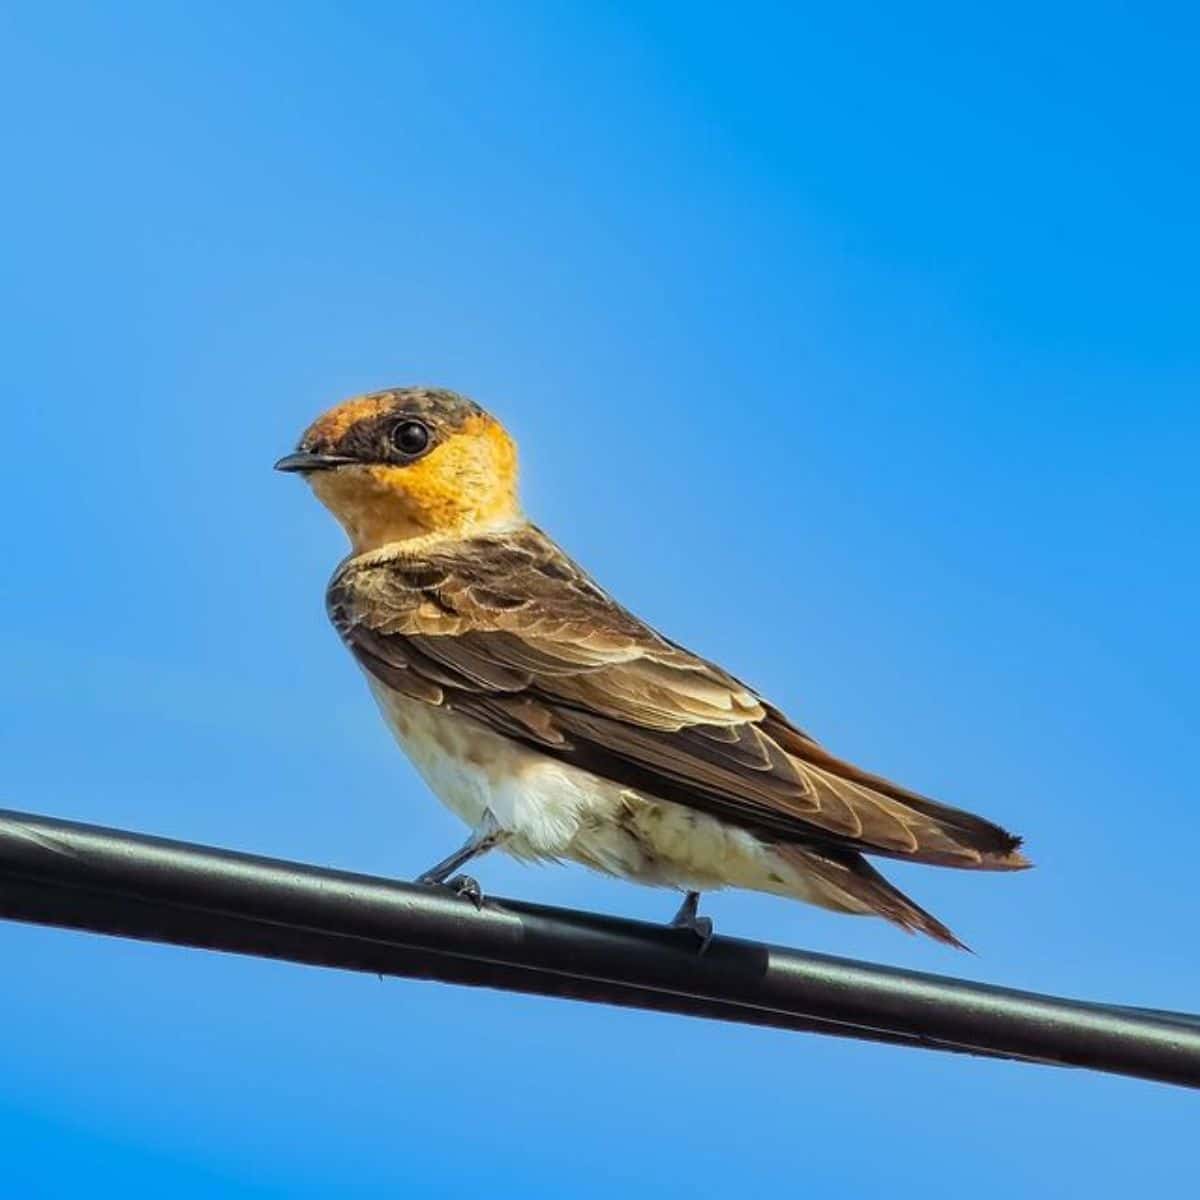 An adorable Cave Swallow perched on a cable.